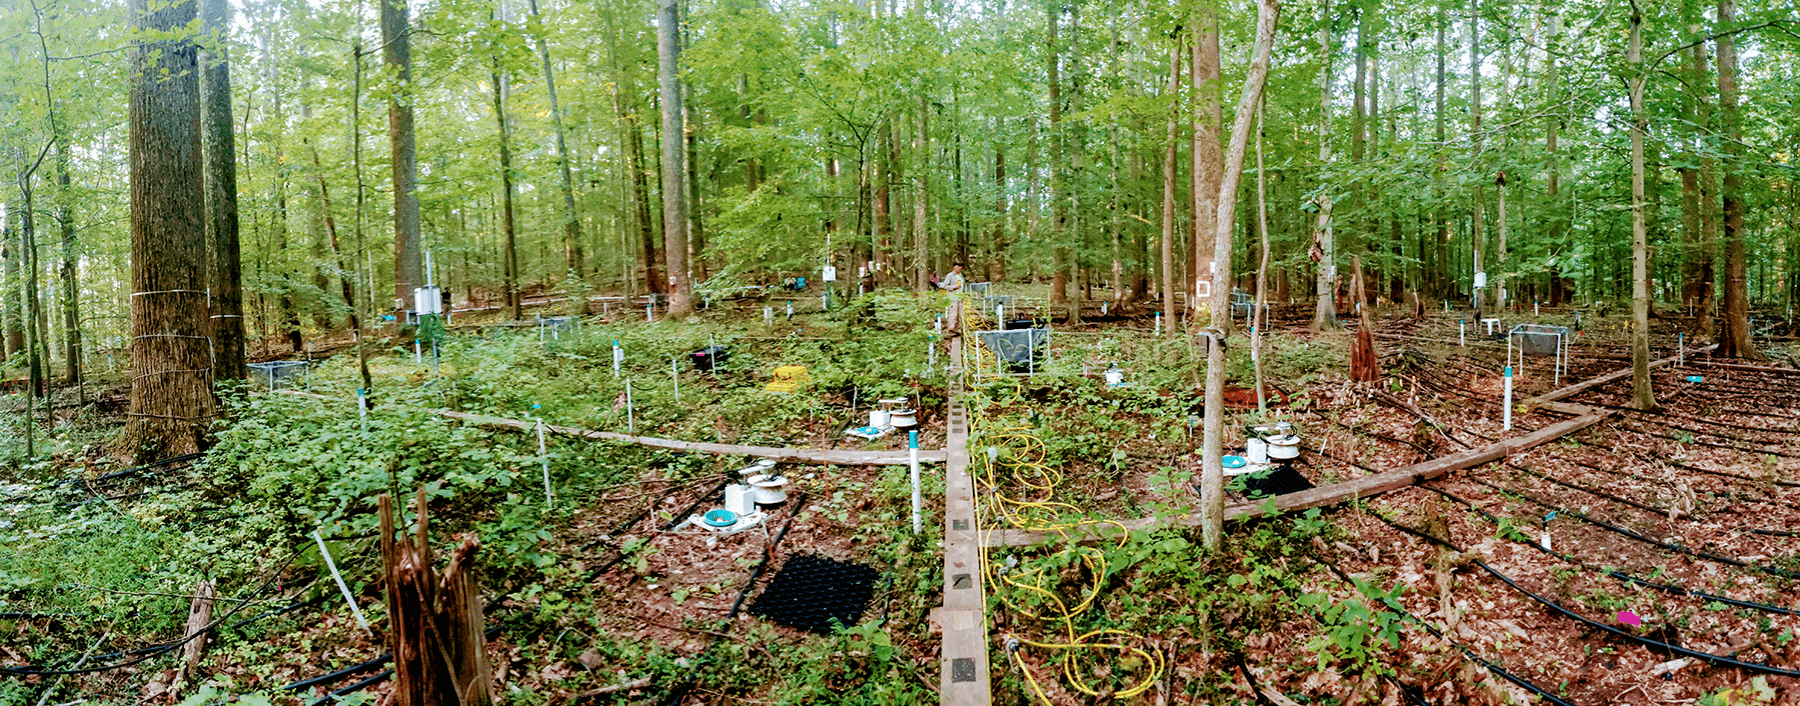 panoramic shot of the forest testing site with LI-COR soil chambers